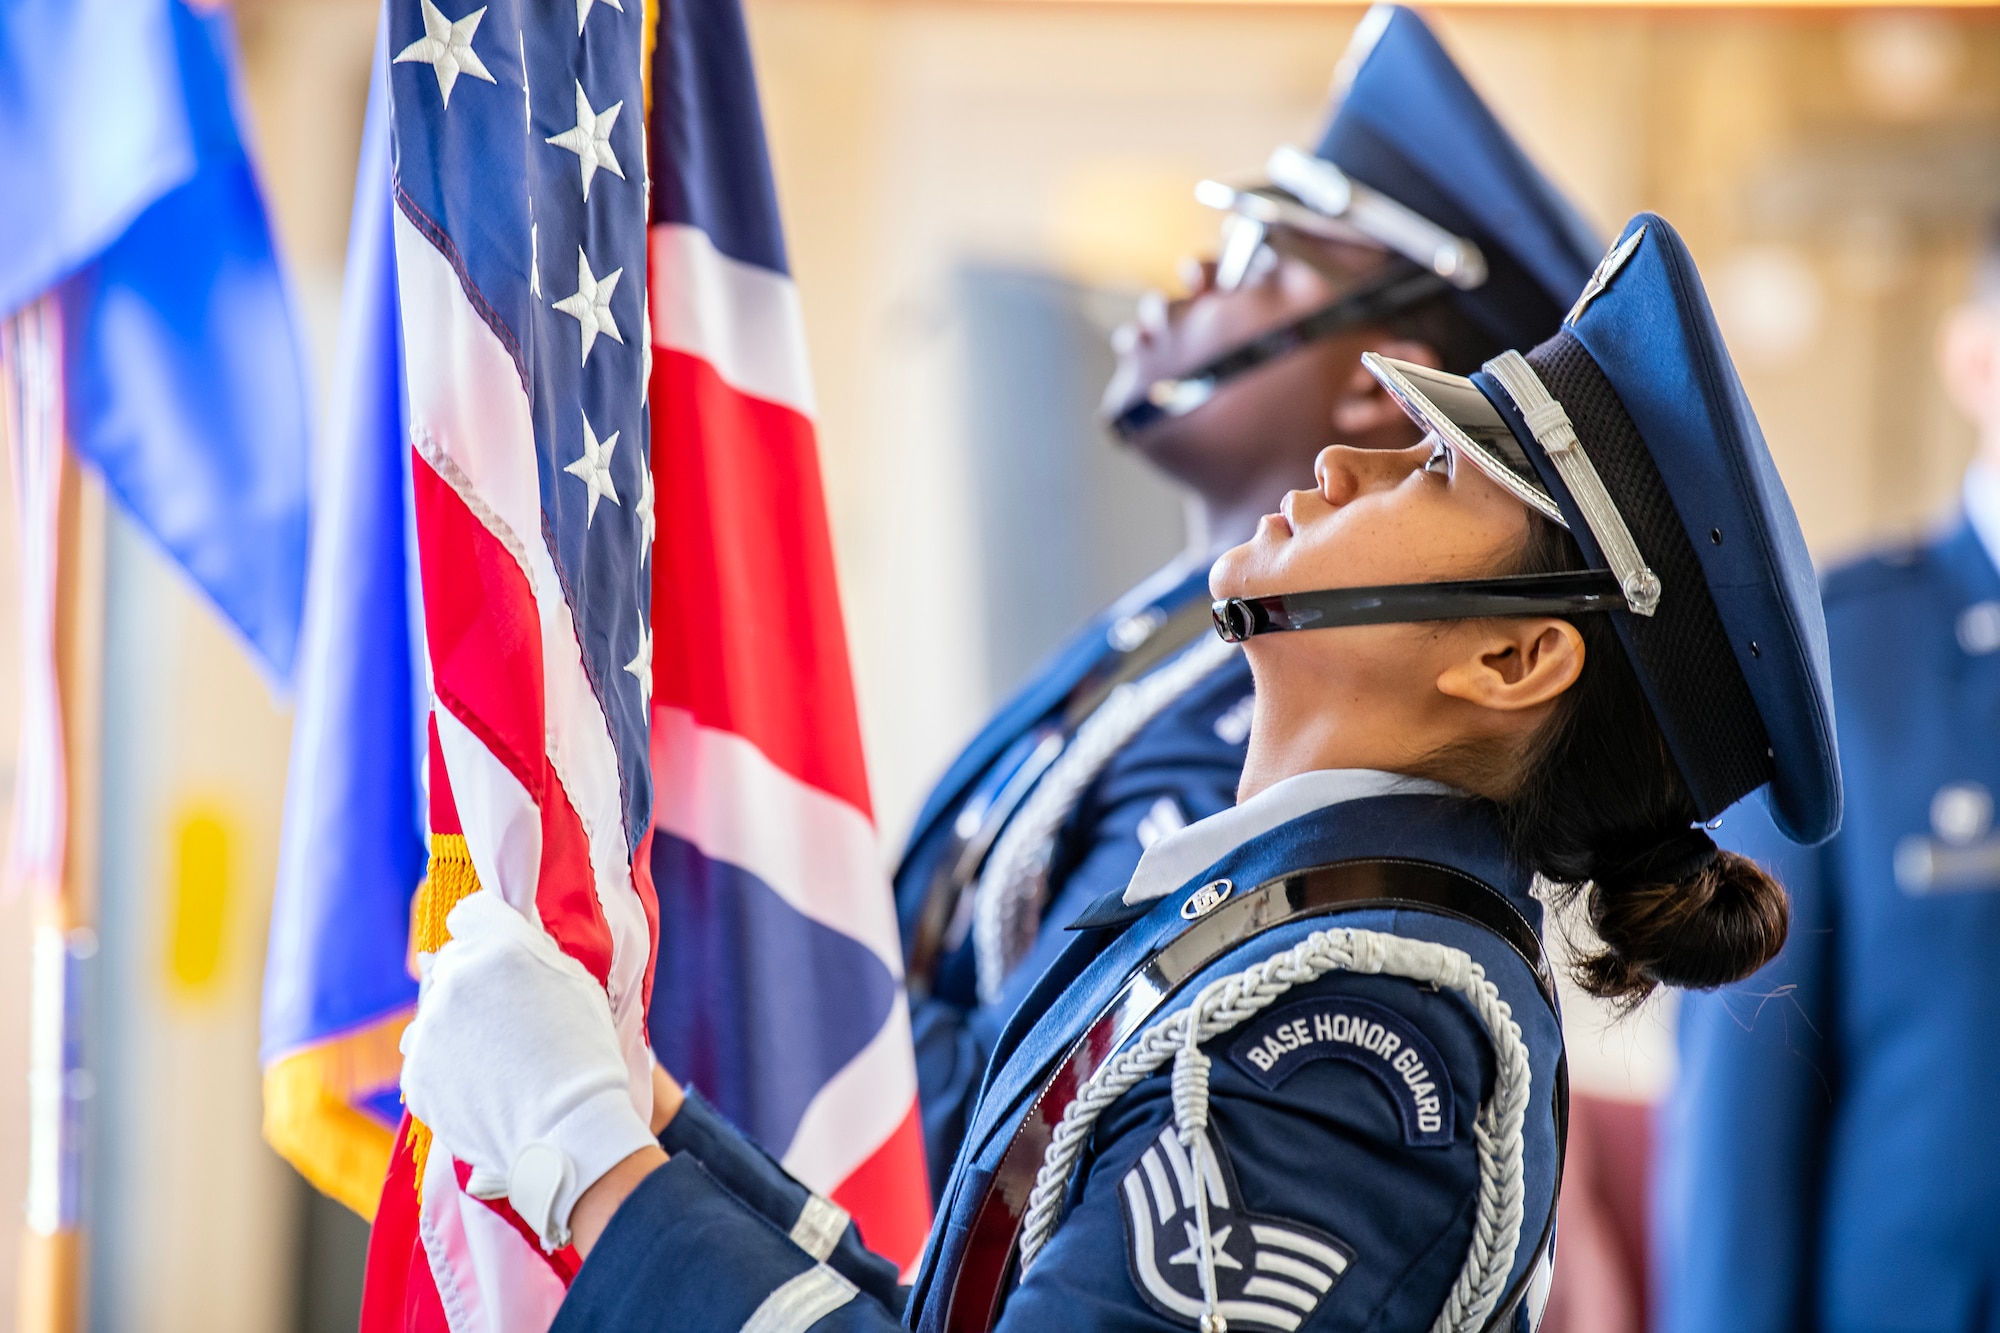 Airmen from the 423d Air Base Group Honor Guard post the colors during a change of command ceremony at RAF Croughton, England, June 15, 2023. The 423d ABG HG supported the ceremony by posting the colors and rendering honors during the ceremony. (U.S. Air Force photo by Staff Sgt. Eugene Oliver)